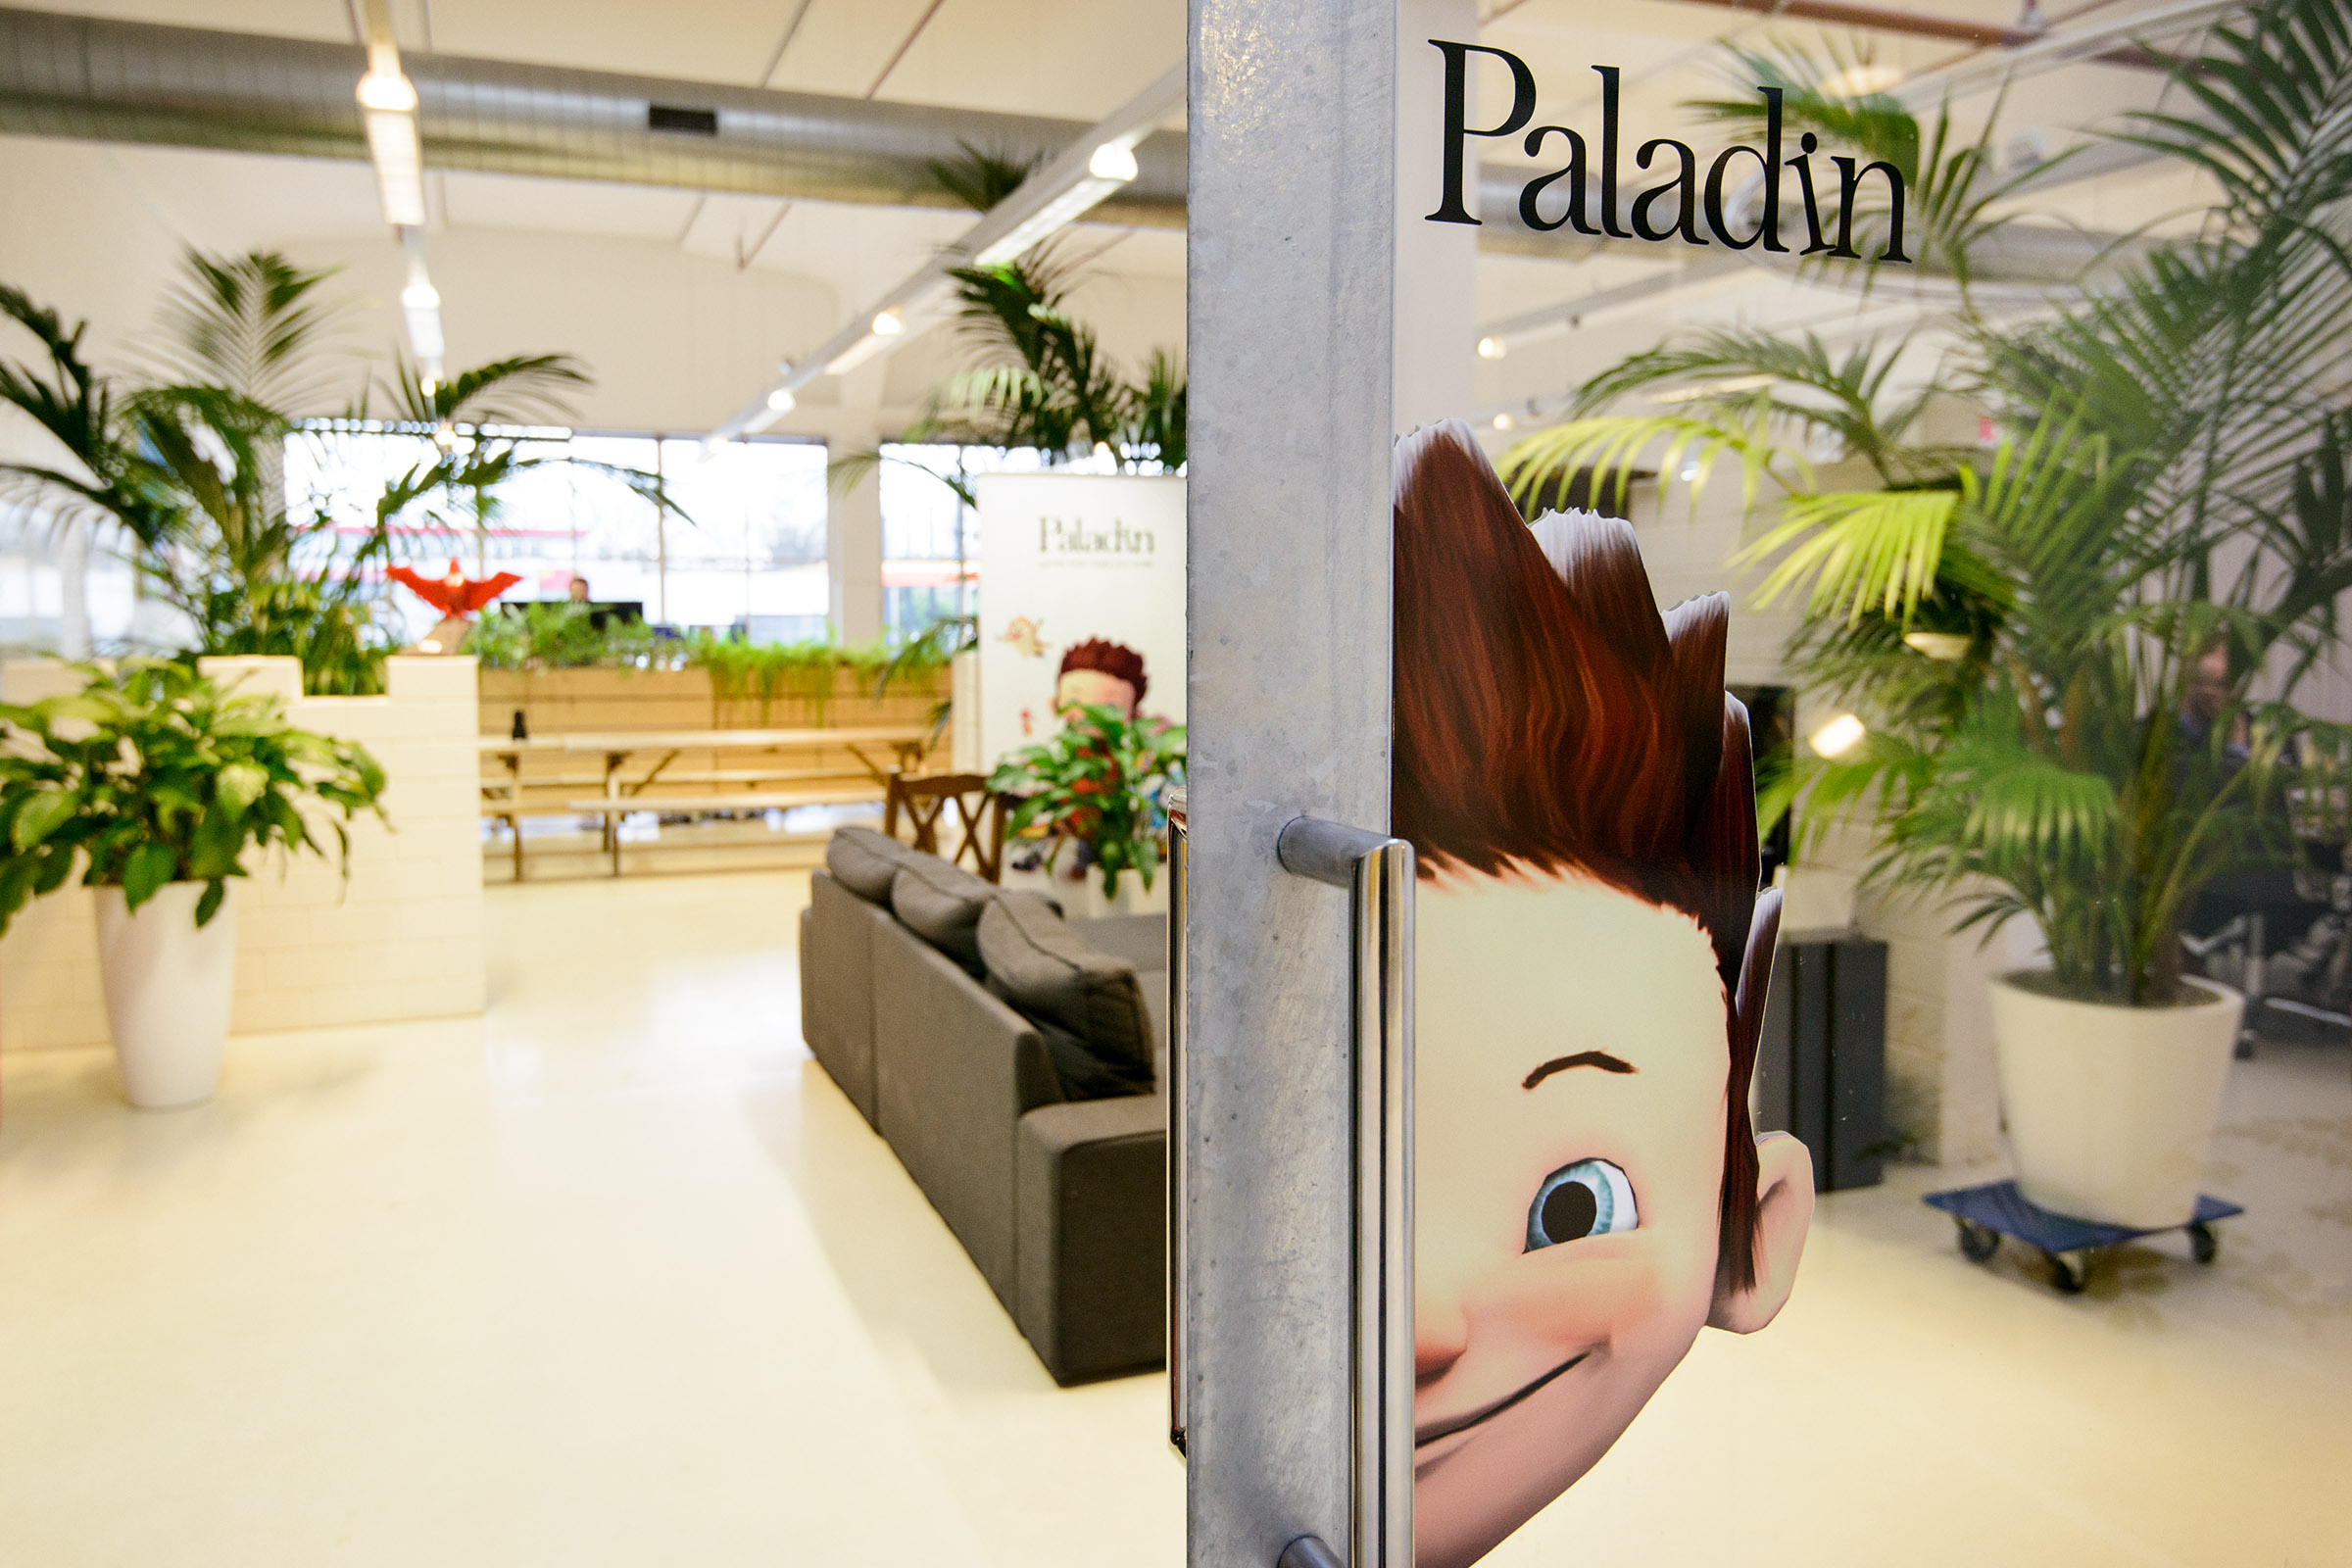 Paladin Studios Is The Second Dutch Studio To Shut Down This Week, 45 Laid Off